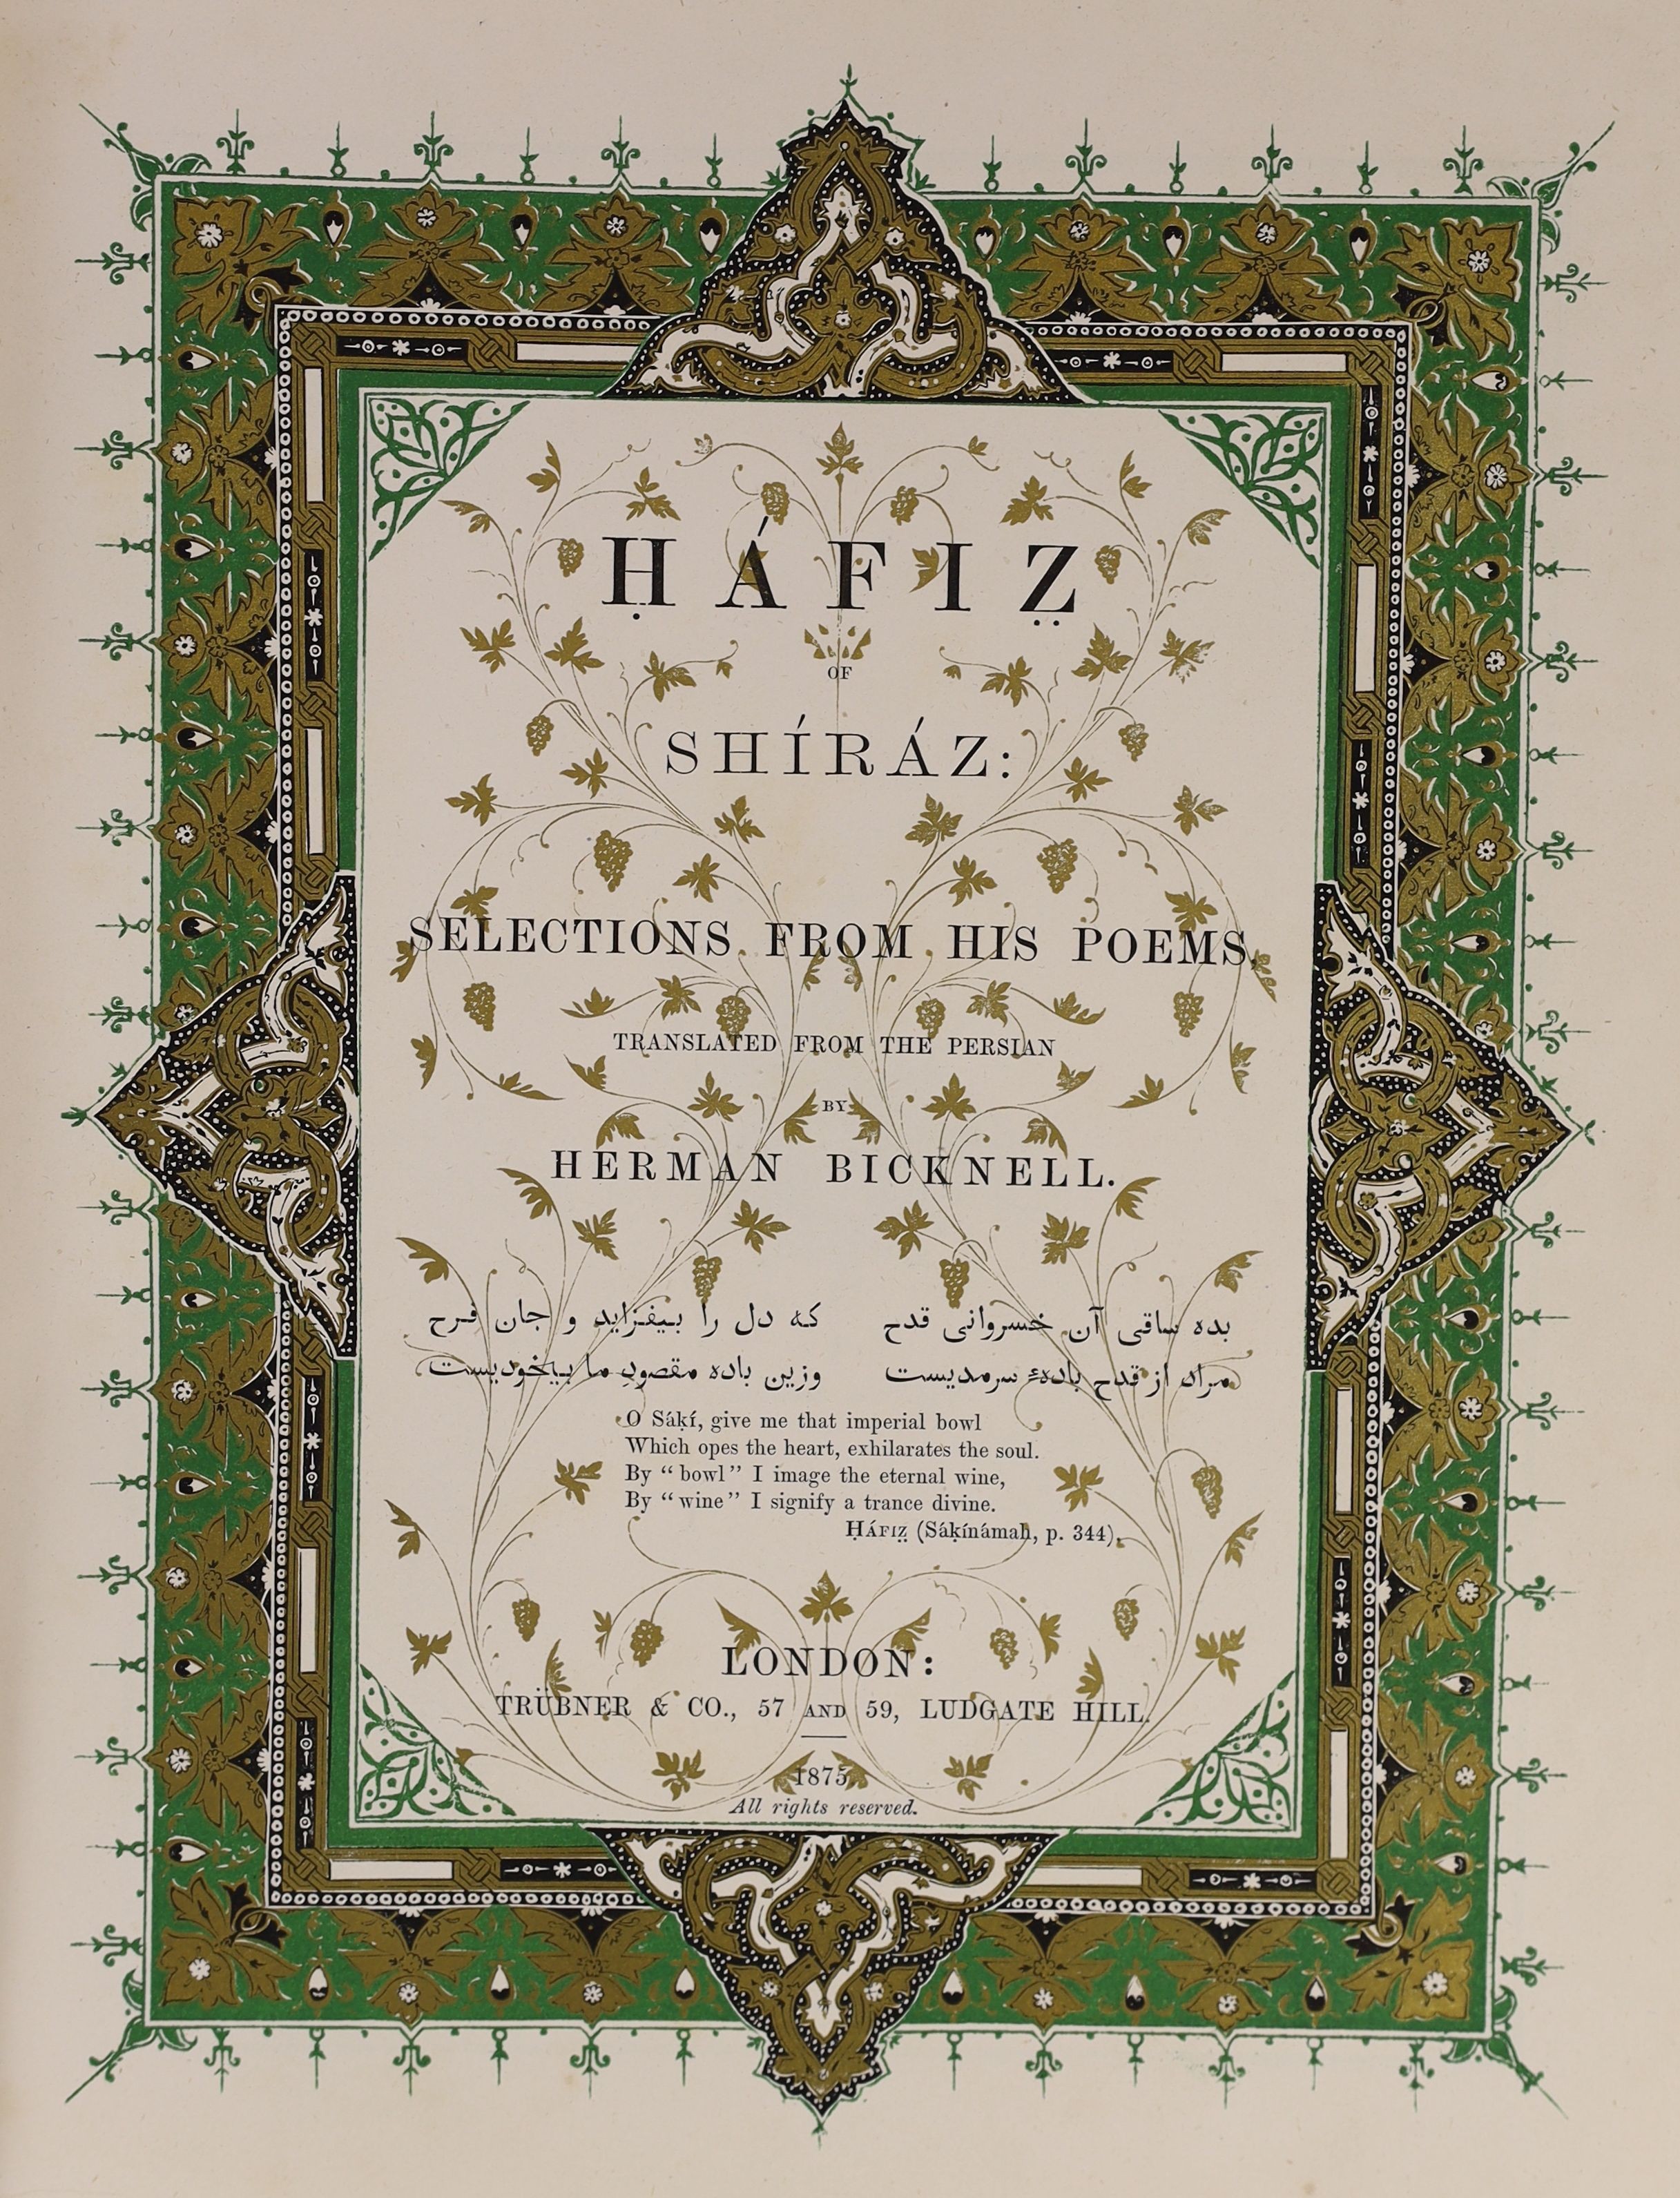 Hafiz of Shiraz: Selections from his Poems, translated by Herman Bicknell, 4to, cloth gilt, with 3 coloured plates, Trubner & Co; London, 1875